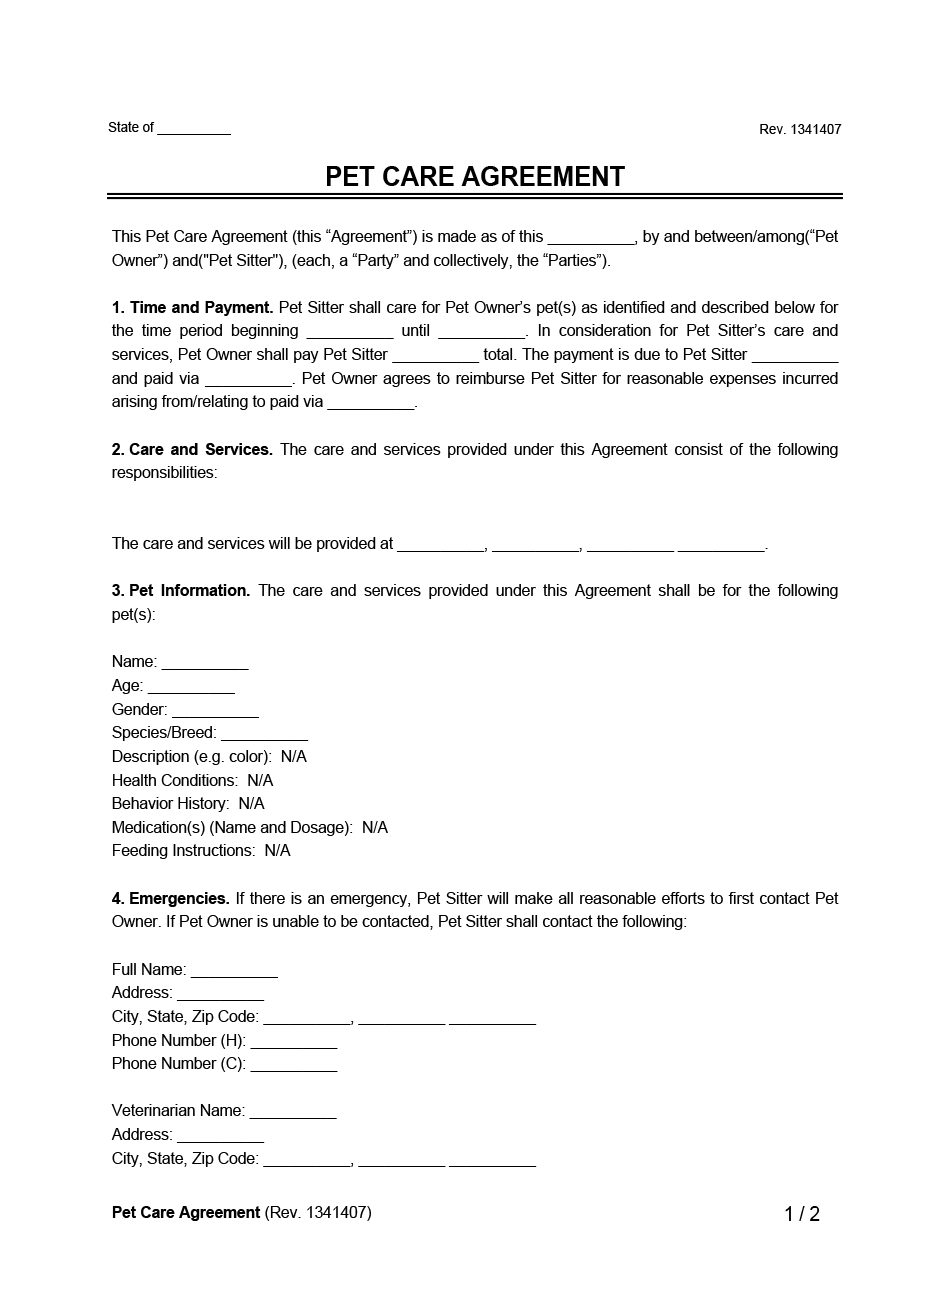 Pet Care Agreement Example Form